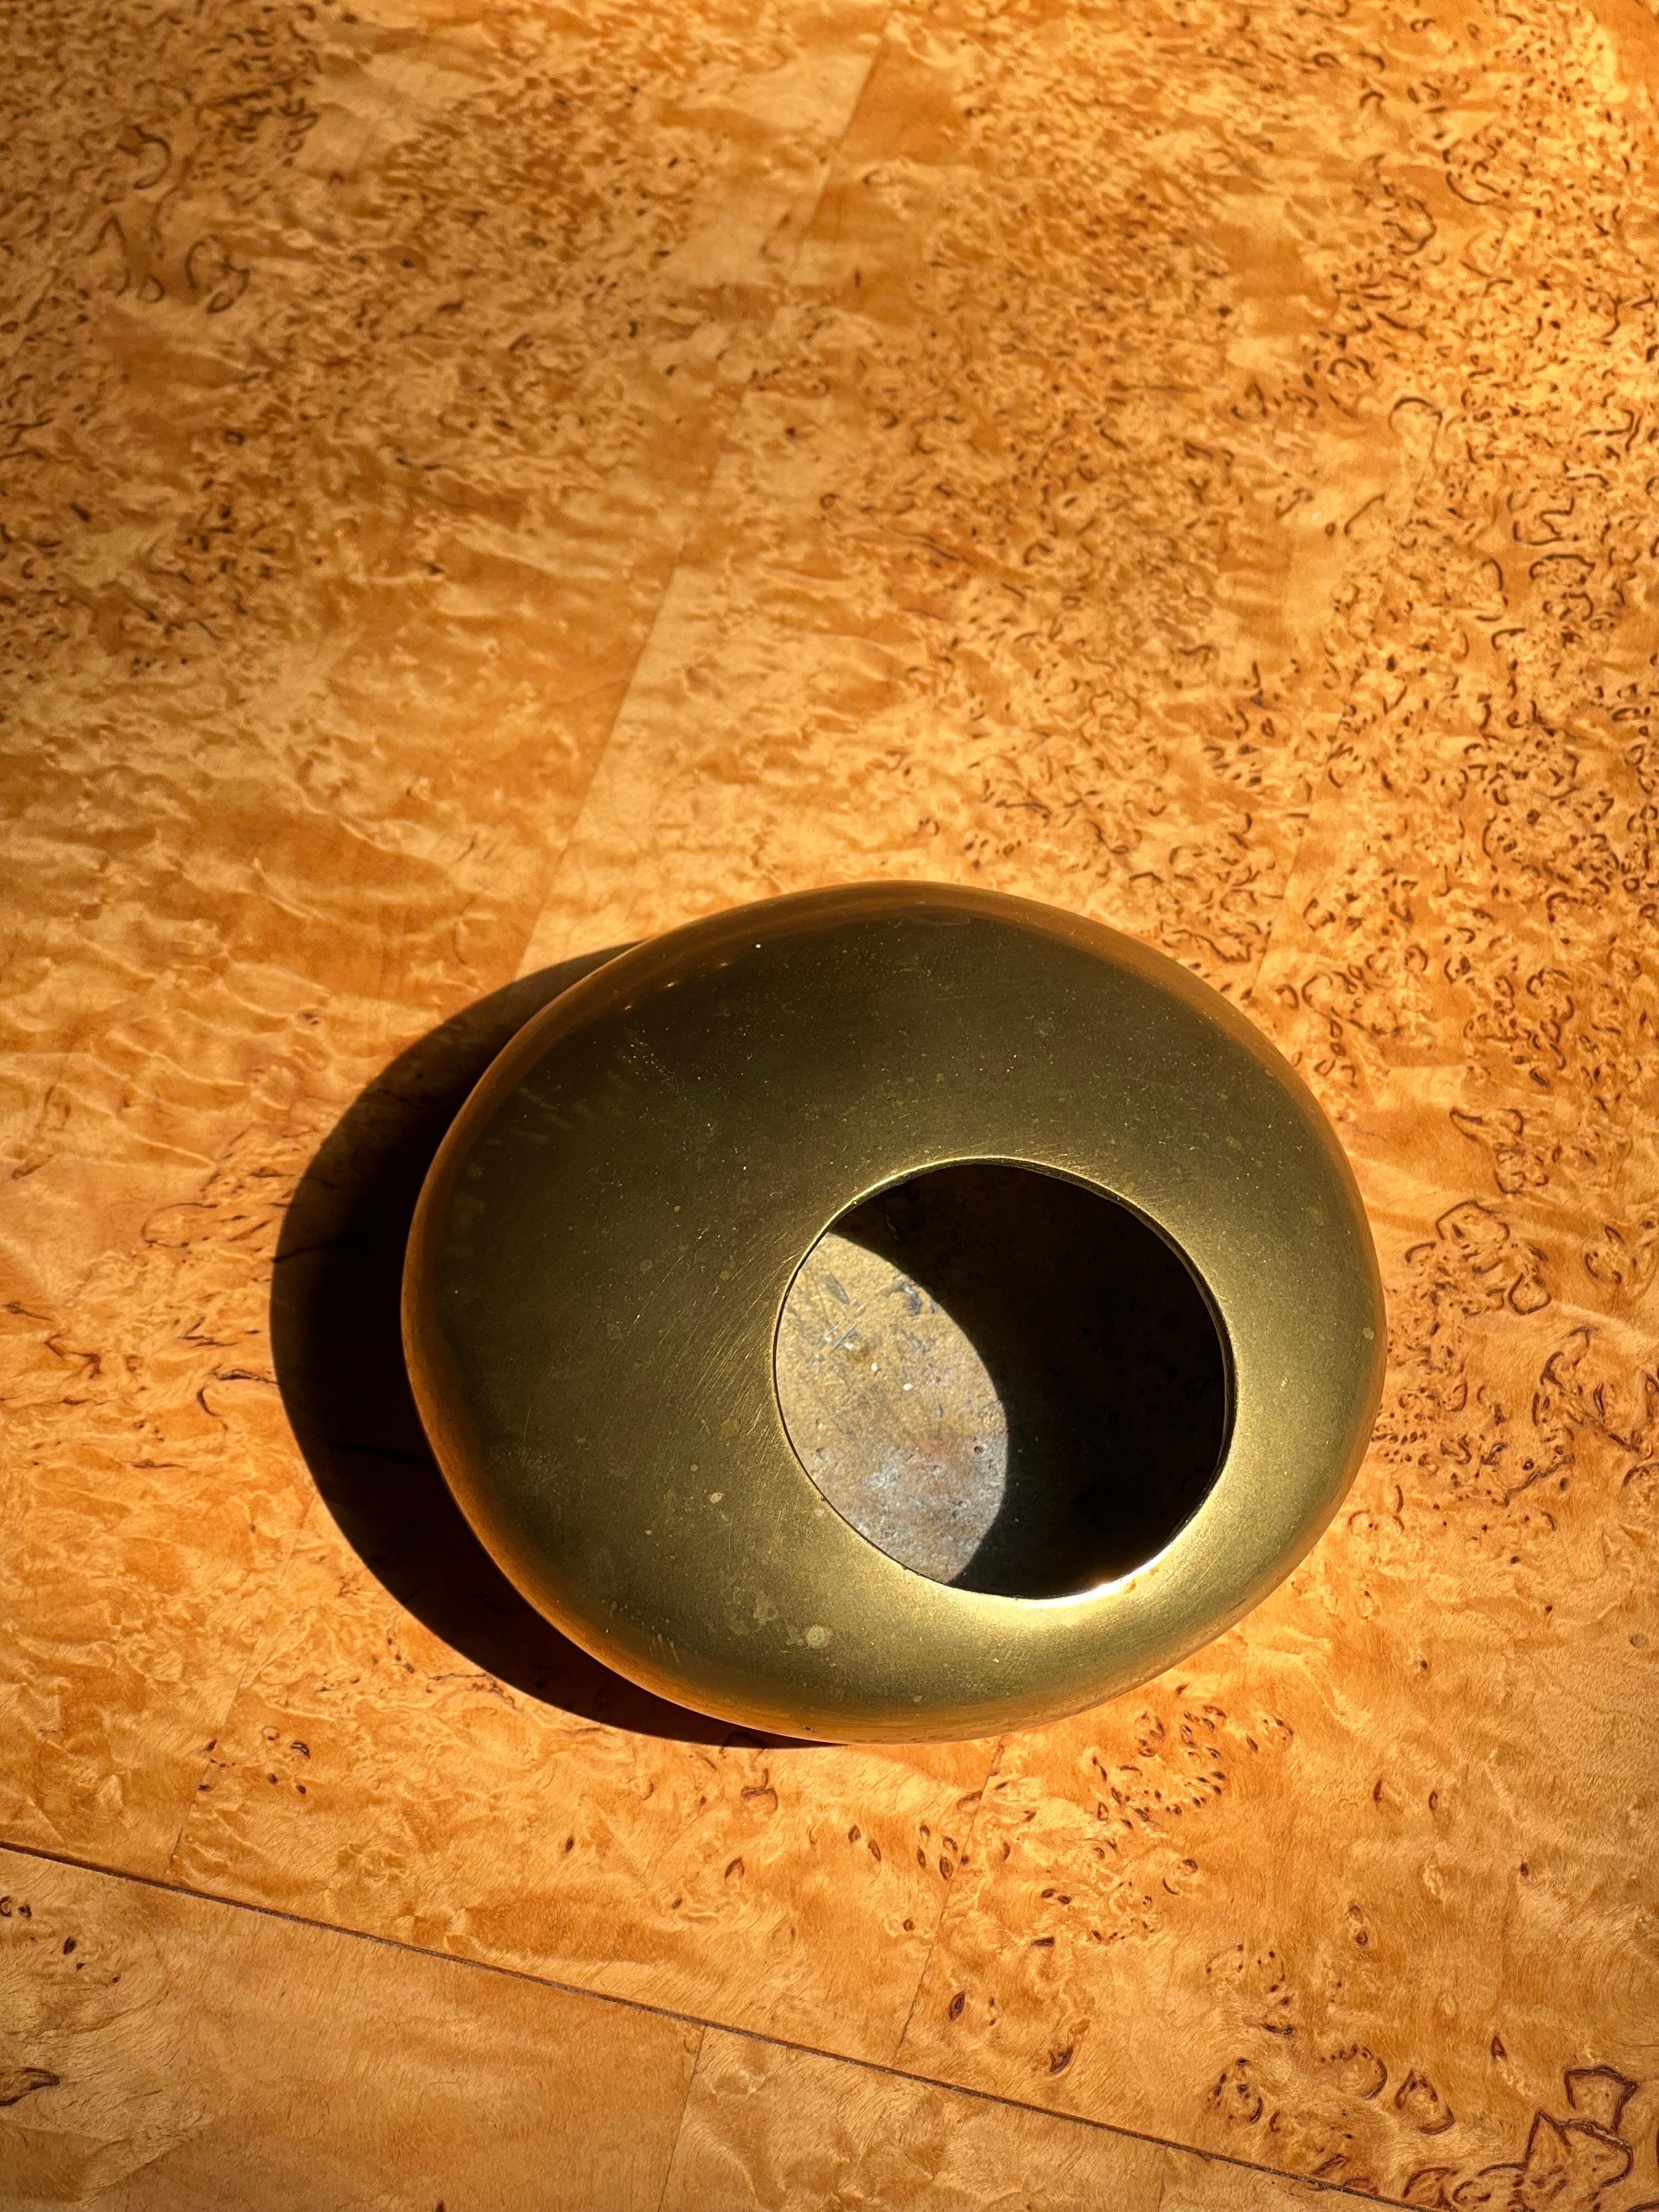 Unique and rare bronze ashtray attributed to Roger Tallon. It is so similar the the ORB he designed but we are not 100 percent sure so we prefer to attribute it. Massive bronze, with organic shape. Slick as a nice stone. Open space is round but